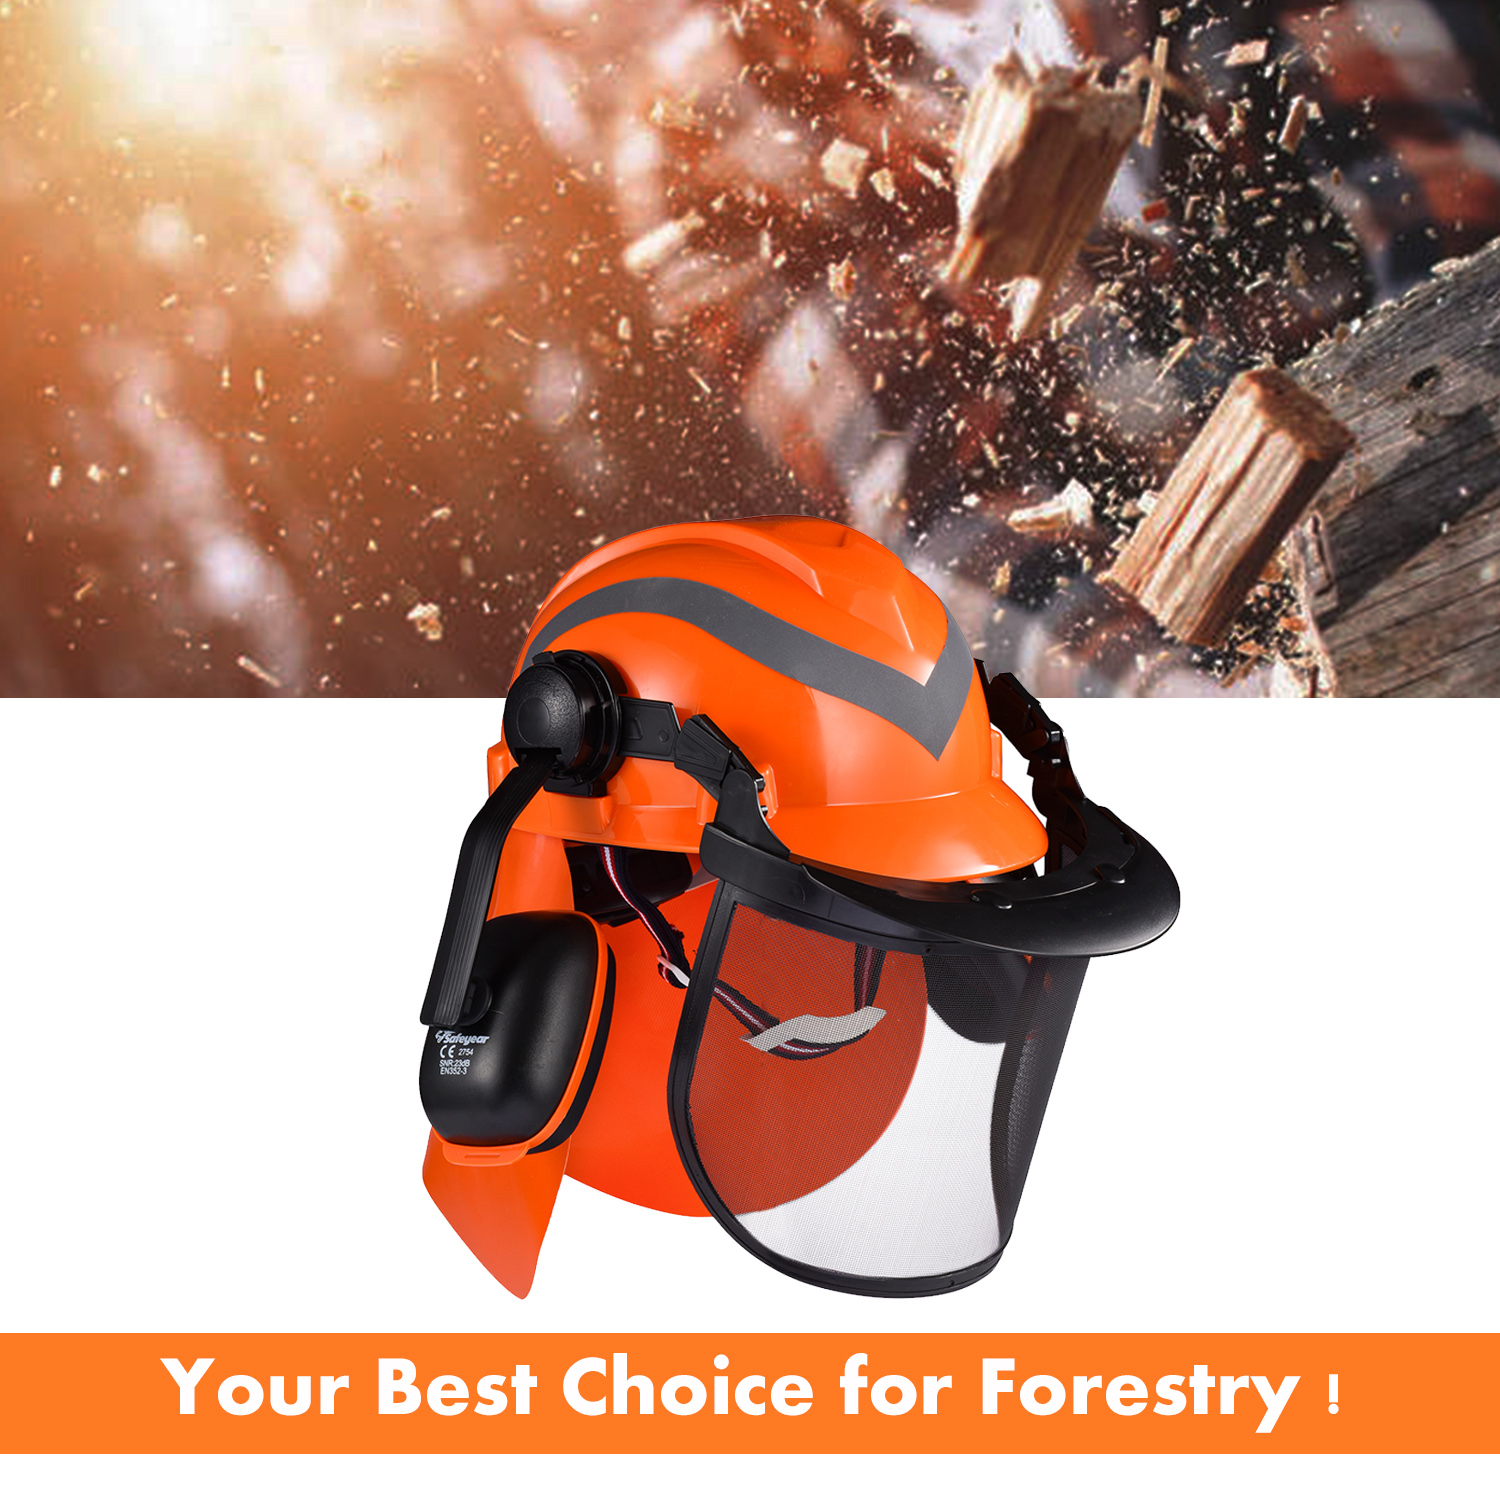 Forest Helmets & Face Shield Protection Hat M-5009 Pomarańczowy